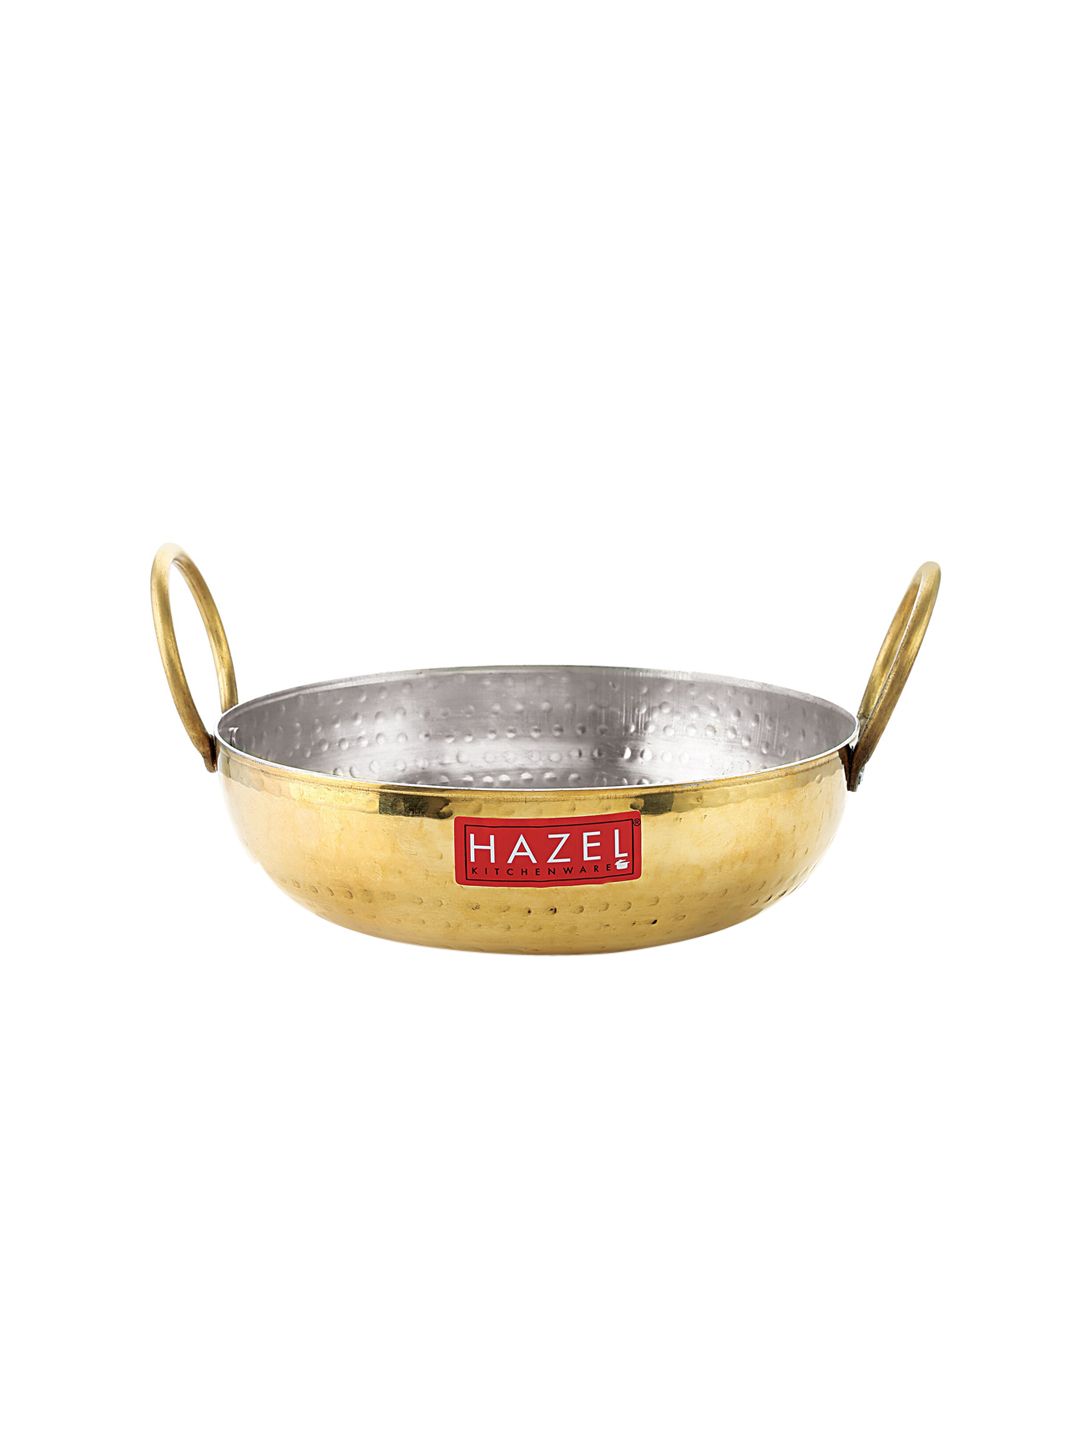 HAZEL Gold-Toned Brass Hammered Kadai Price in India